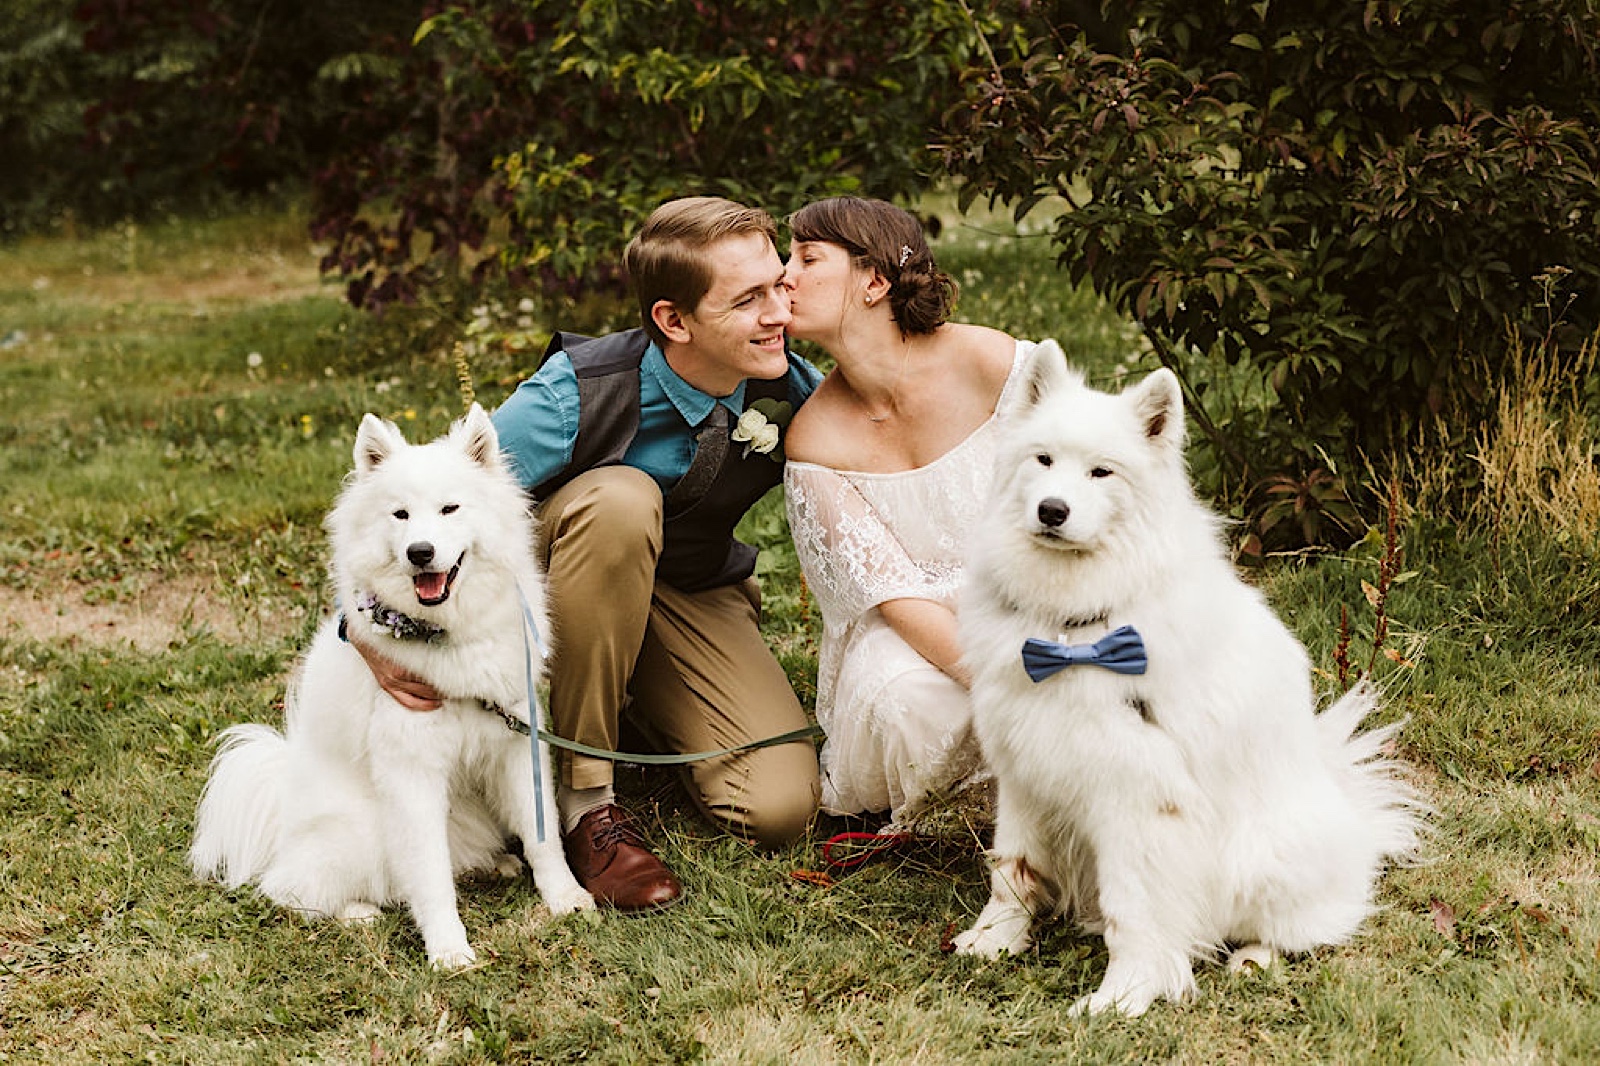 Joyful Intimate Wedding in Sequim, WA: bride and groom with their two dogs